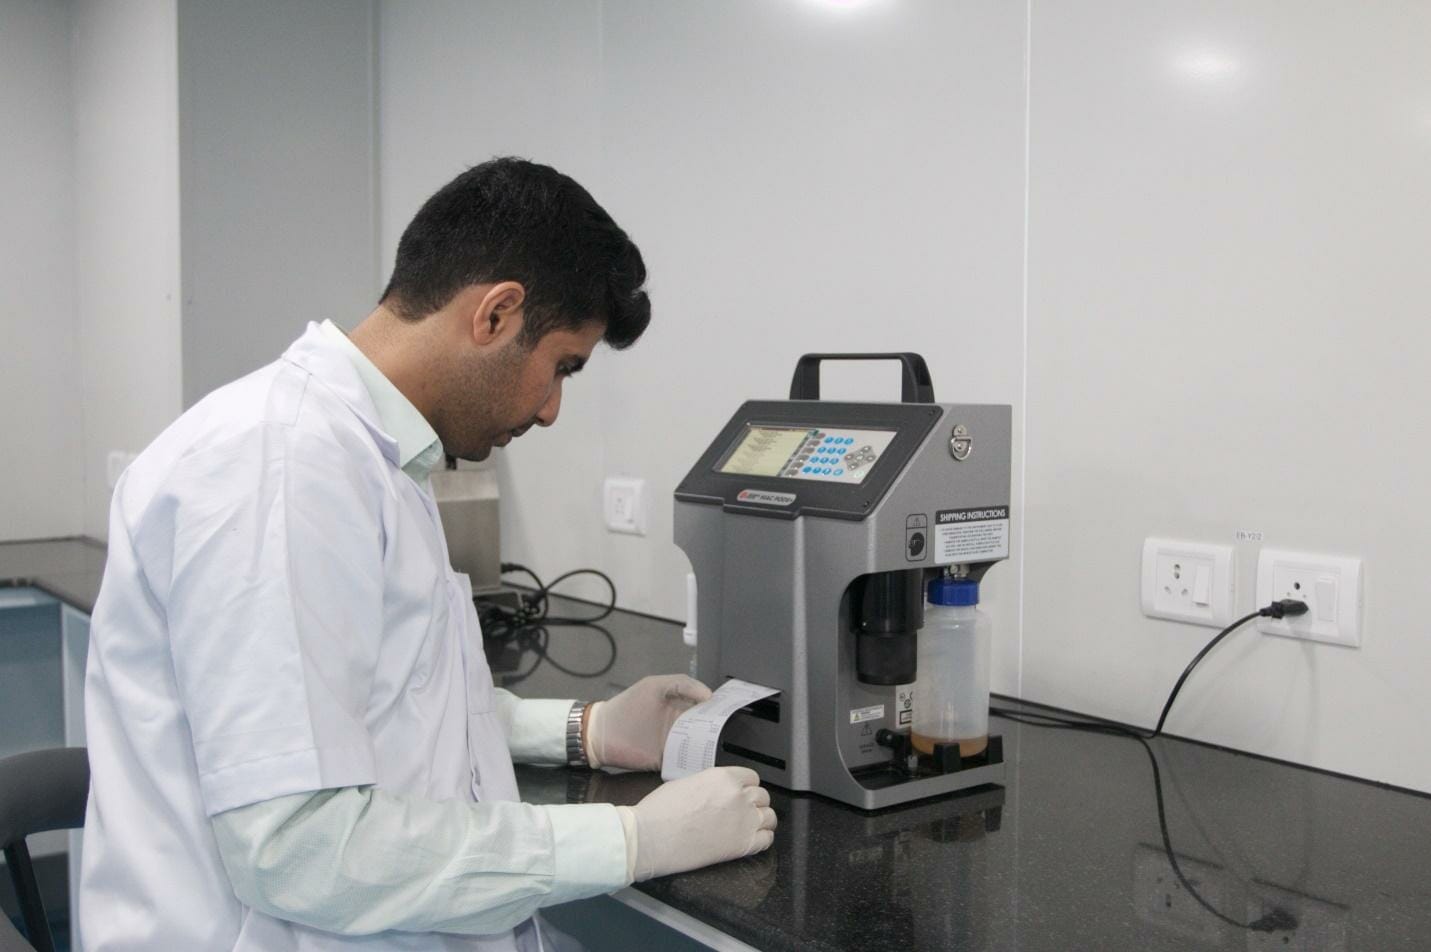 The liquid particle counter which provides the count of particles in each liquid sample tested. Instrument complies with ISO 11171 and provide test results in accordance with ISO 4406